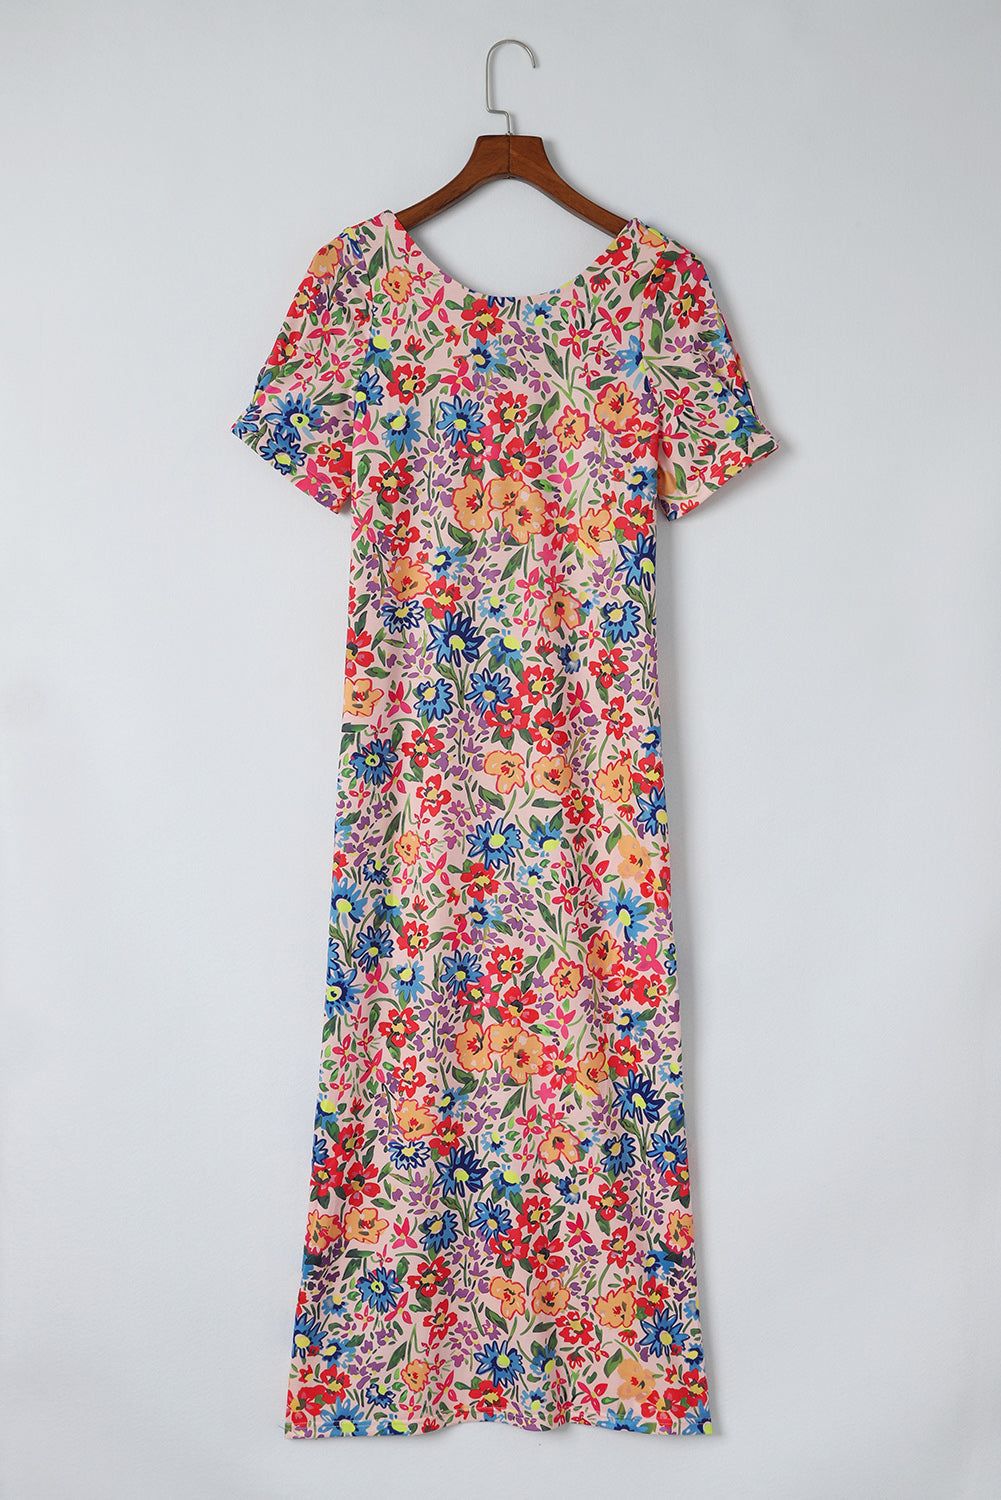 Floral Round Neck Short Sleeve Dress - By Baano